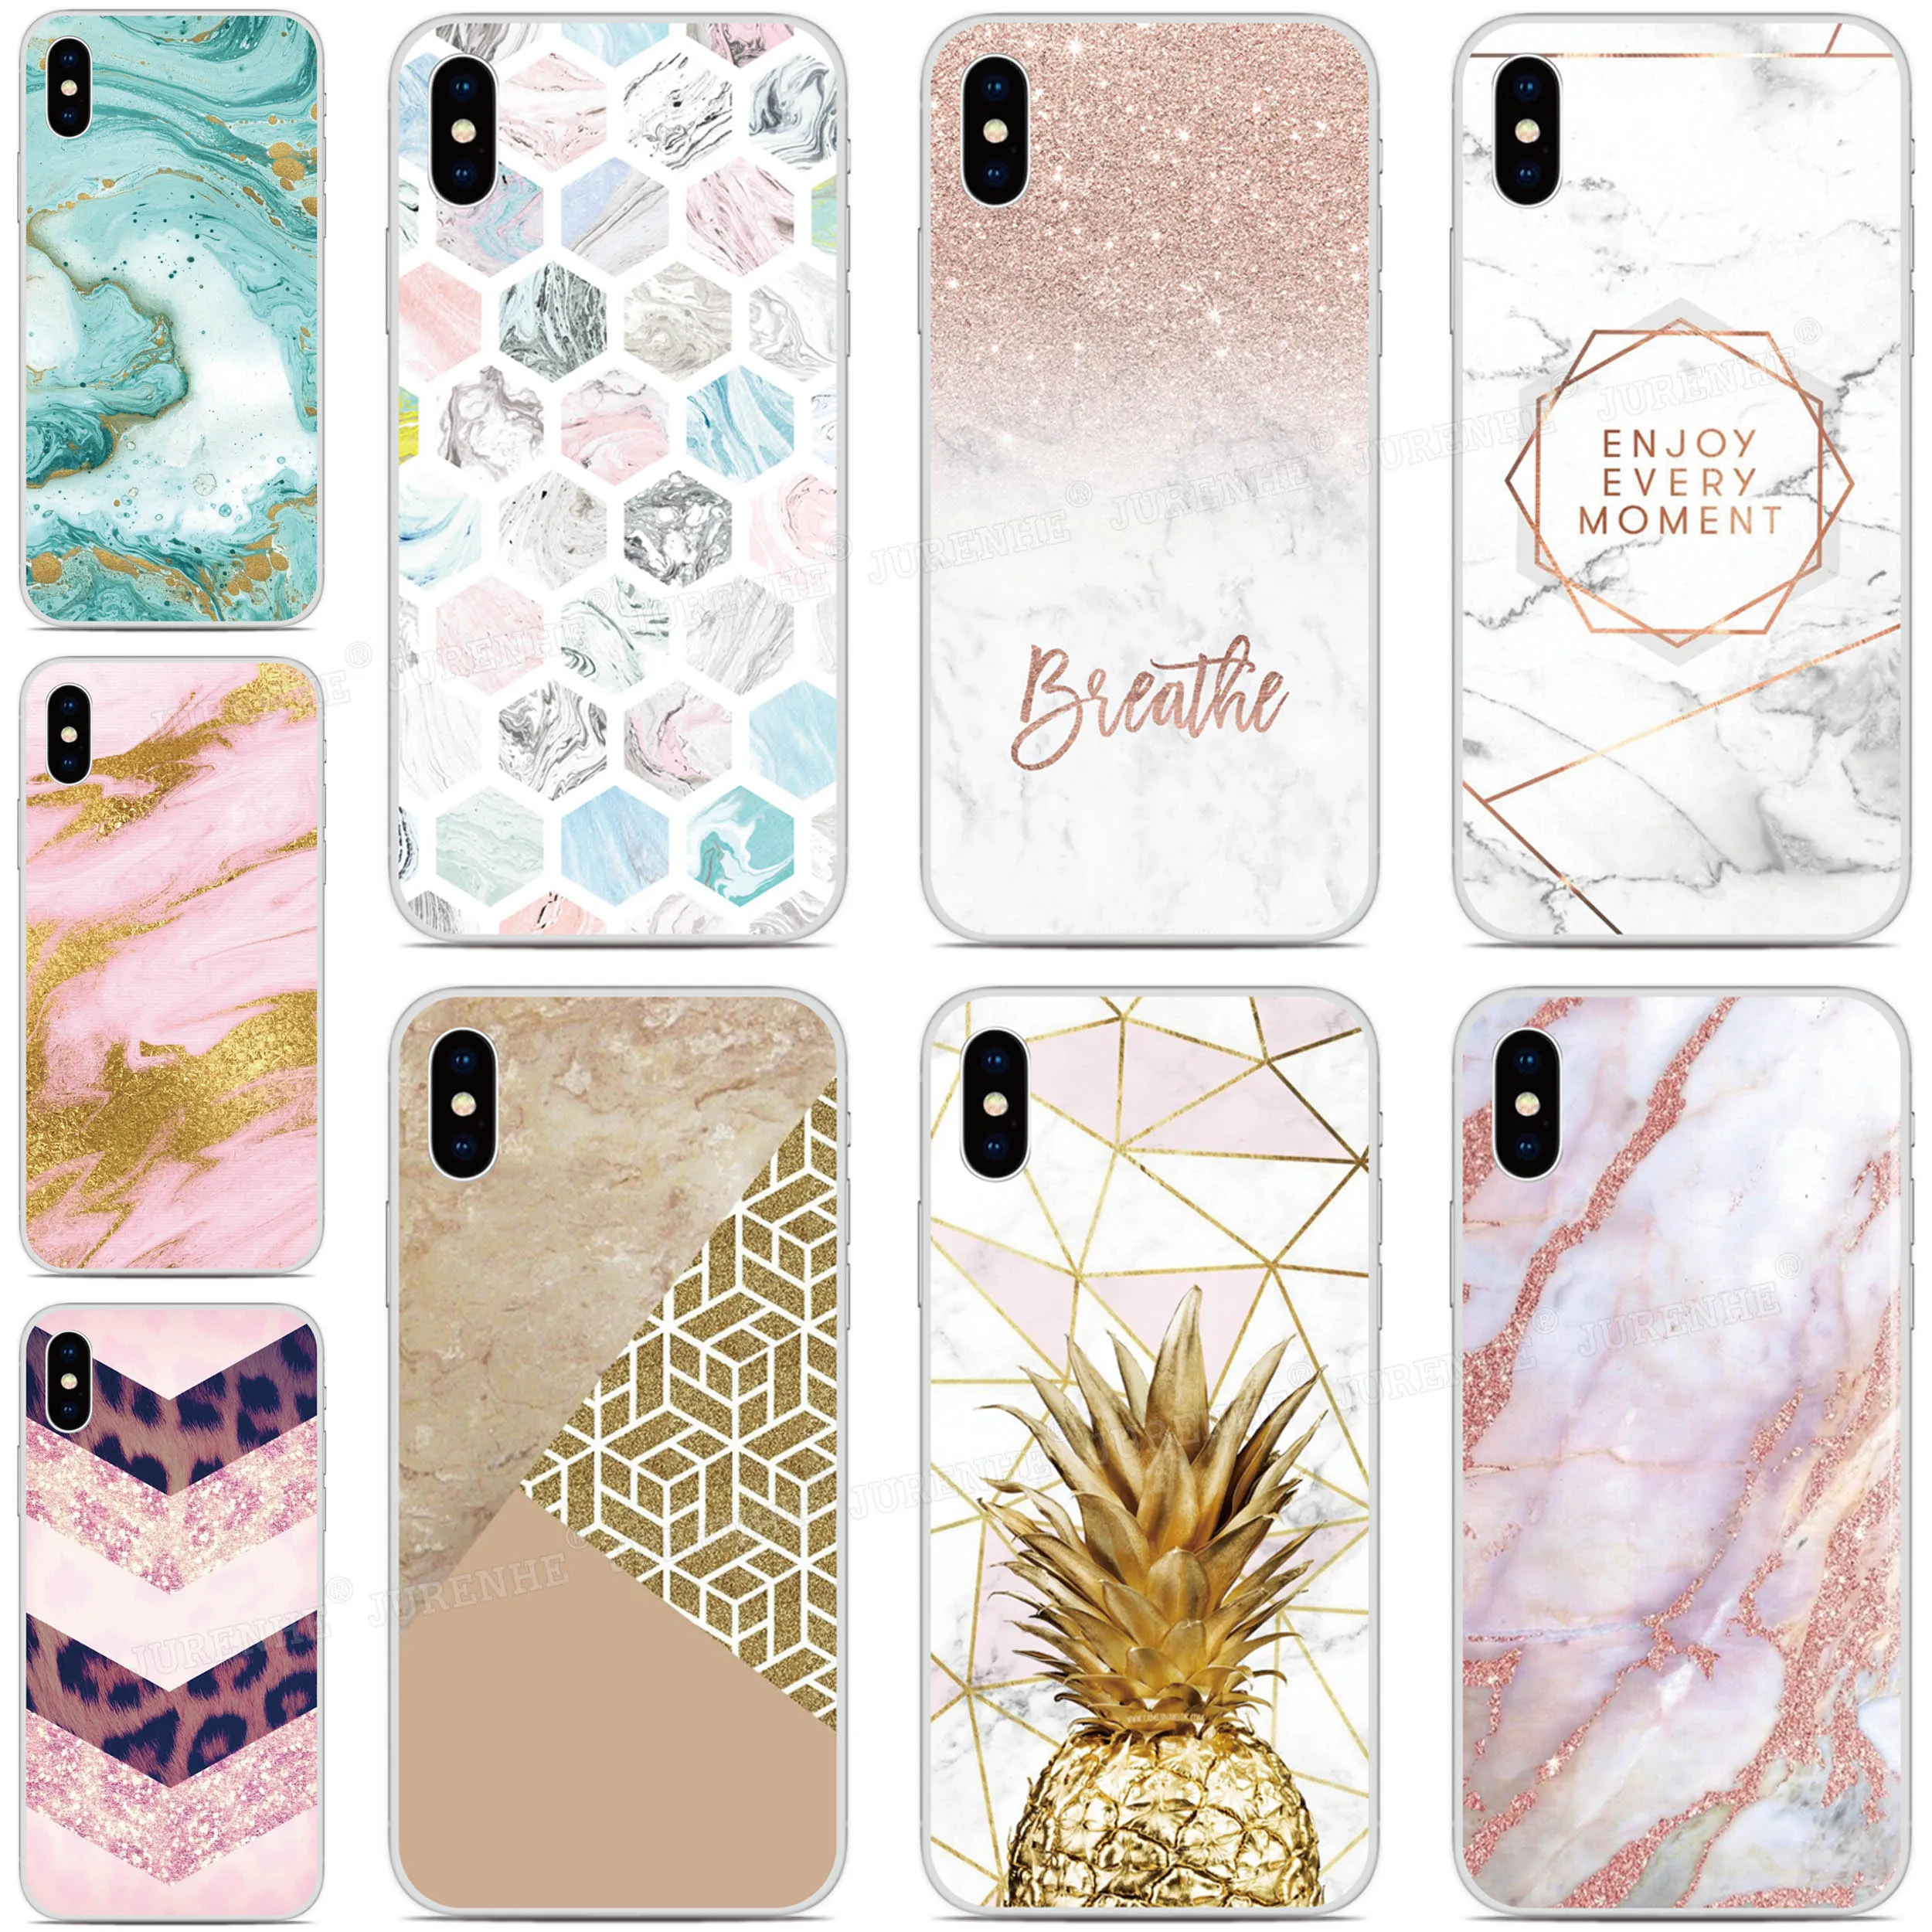 Not Glitter Marble Cover For LG Wing Harmony 4 K42 Q61 Q51 K52 K62 Q52 K92 K71 Q92 Q920 V30 Q7 K22 Plus Style 3 X Power 3 Case